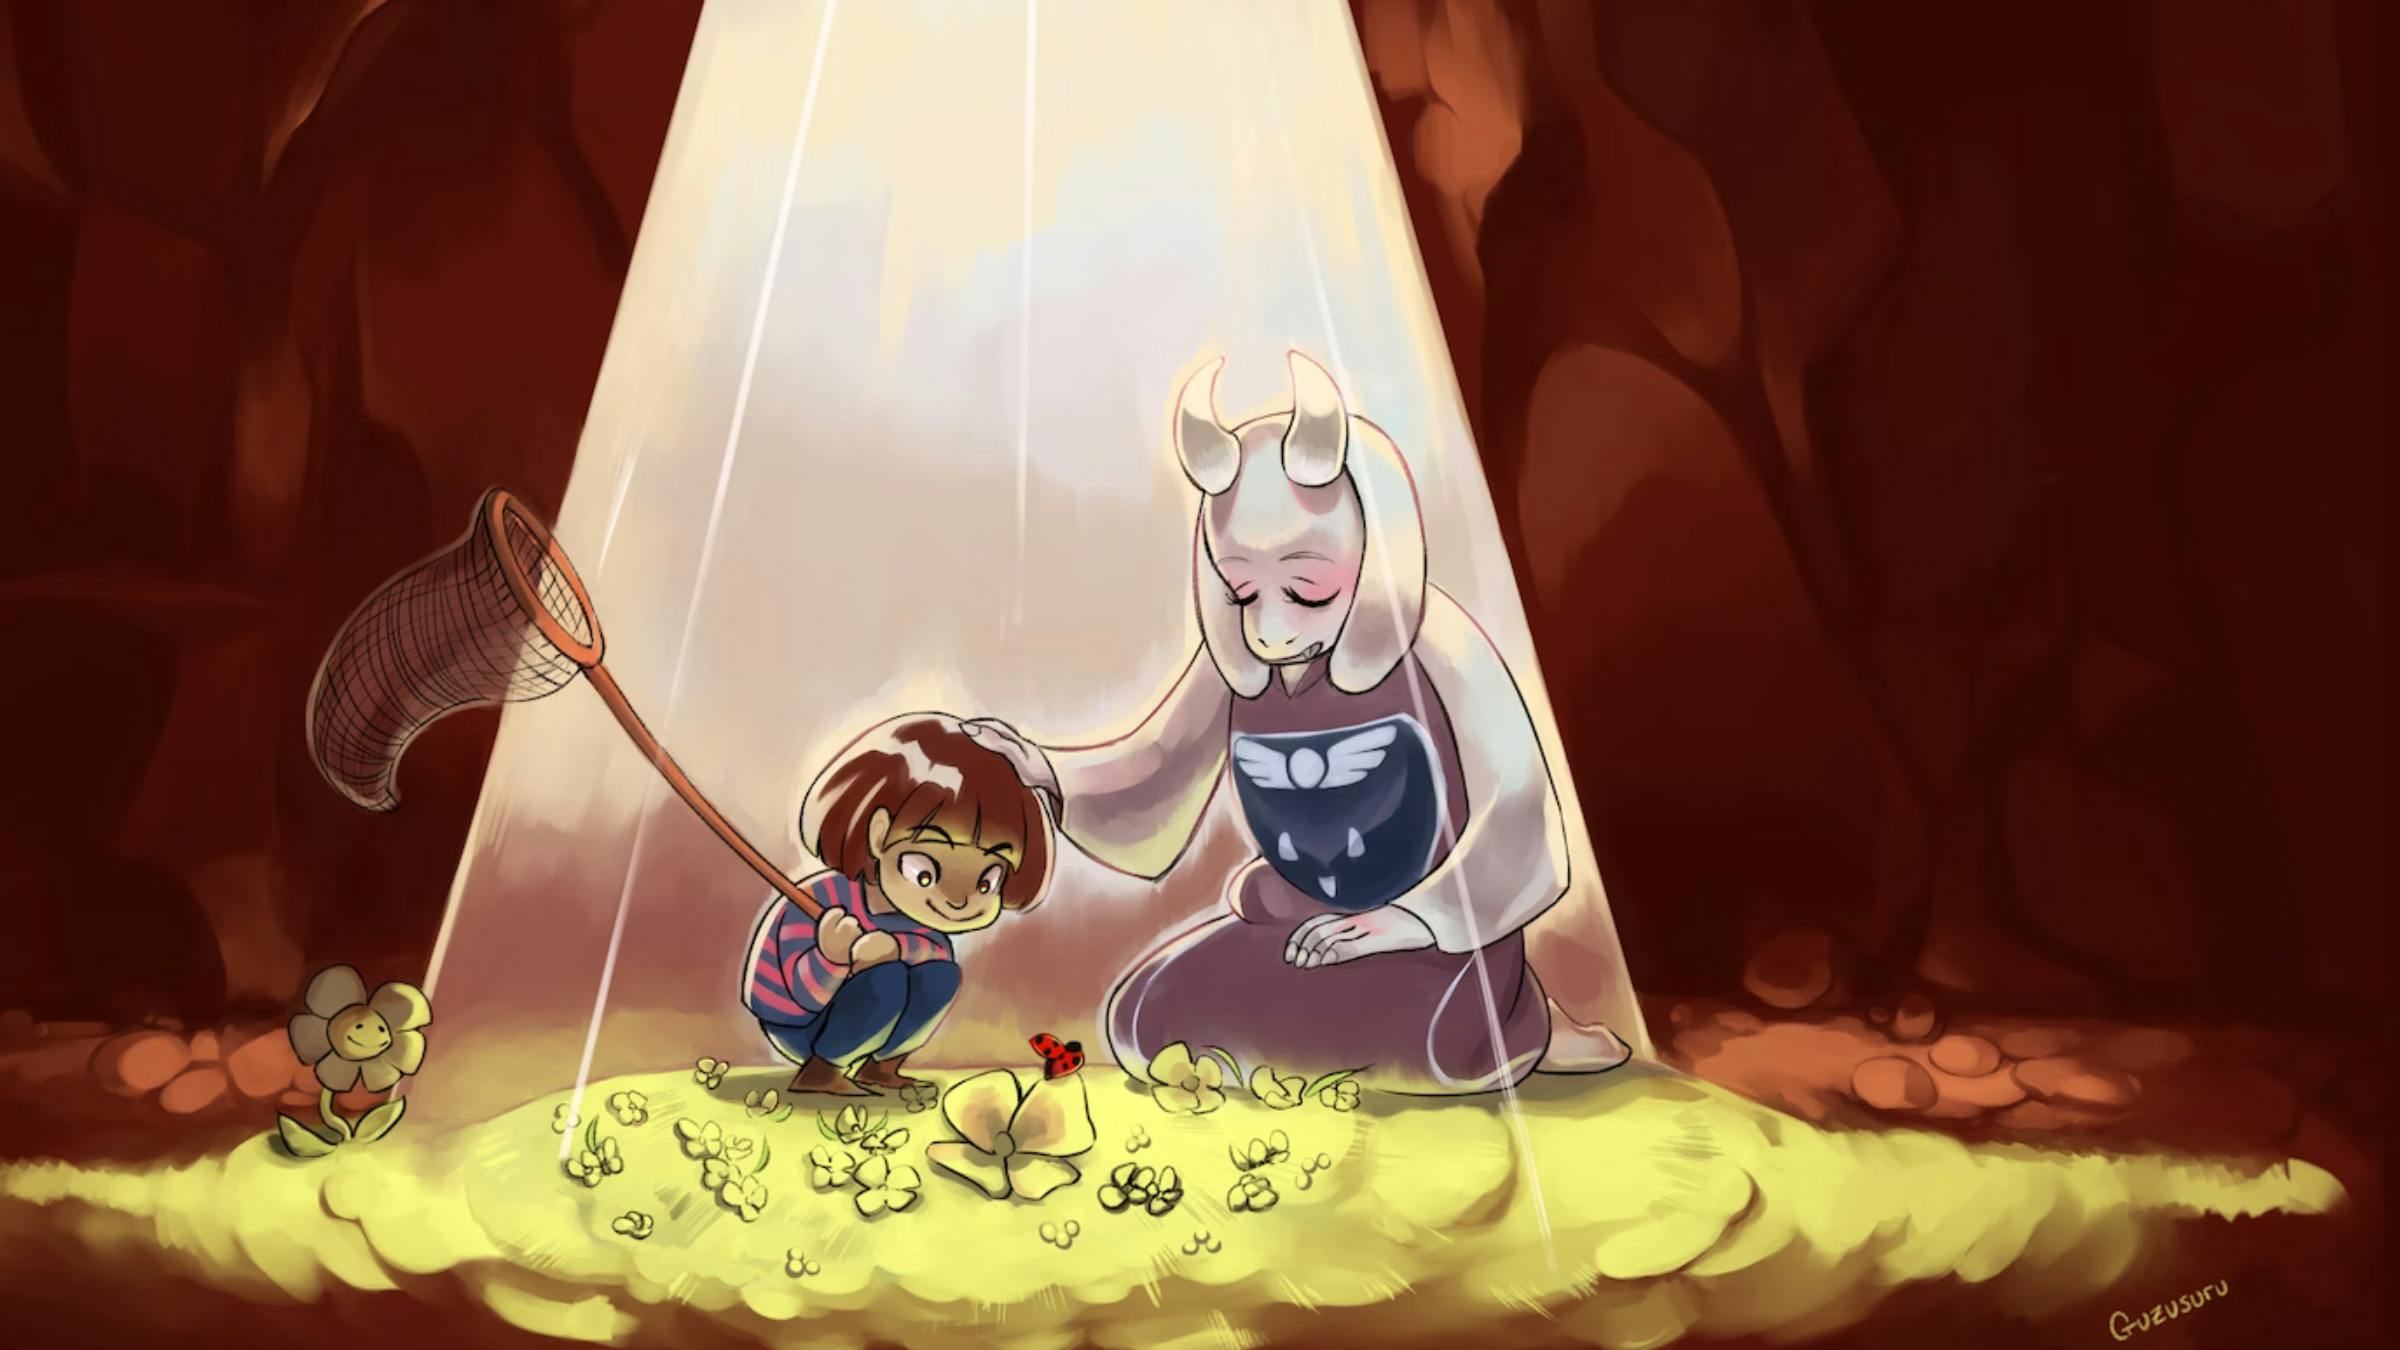 "Undertale" developer Toby Fox collaborated with influencers across multiple channels of content, expanding audience engagement with the game to unprecedented lengths. 